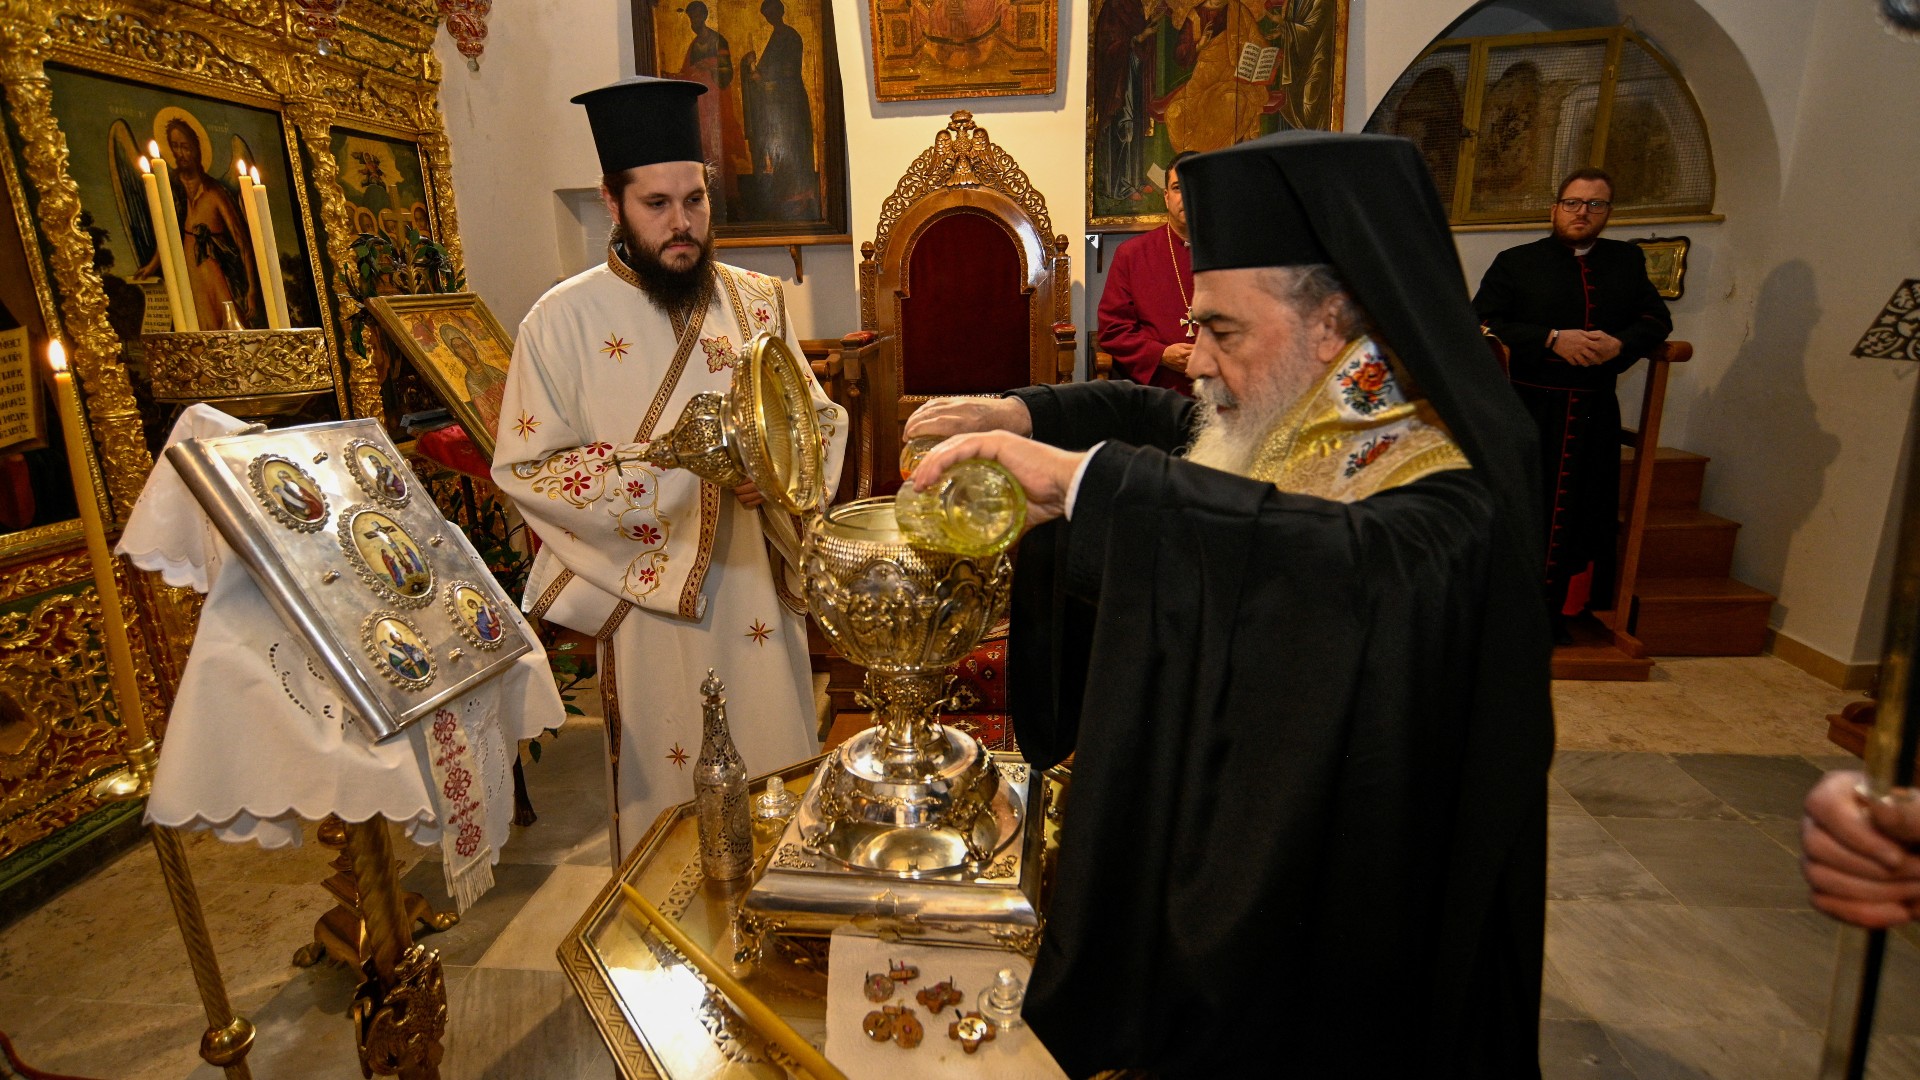 Holy oil to anoint King Charles prepared in Jerusalem's Old City | Middle East Eye